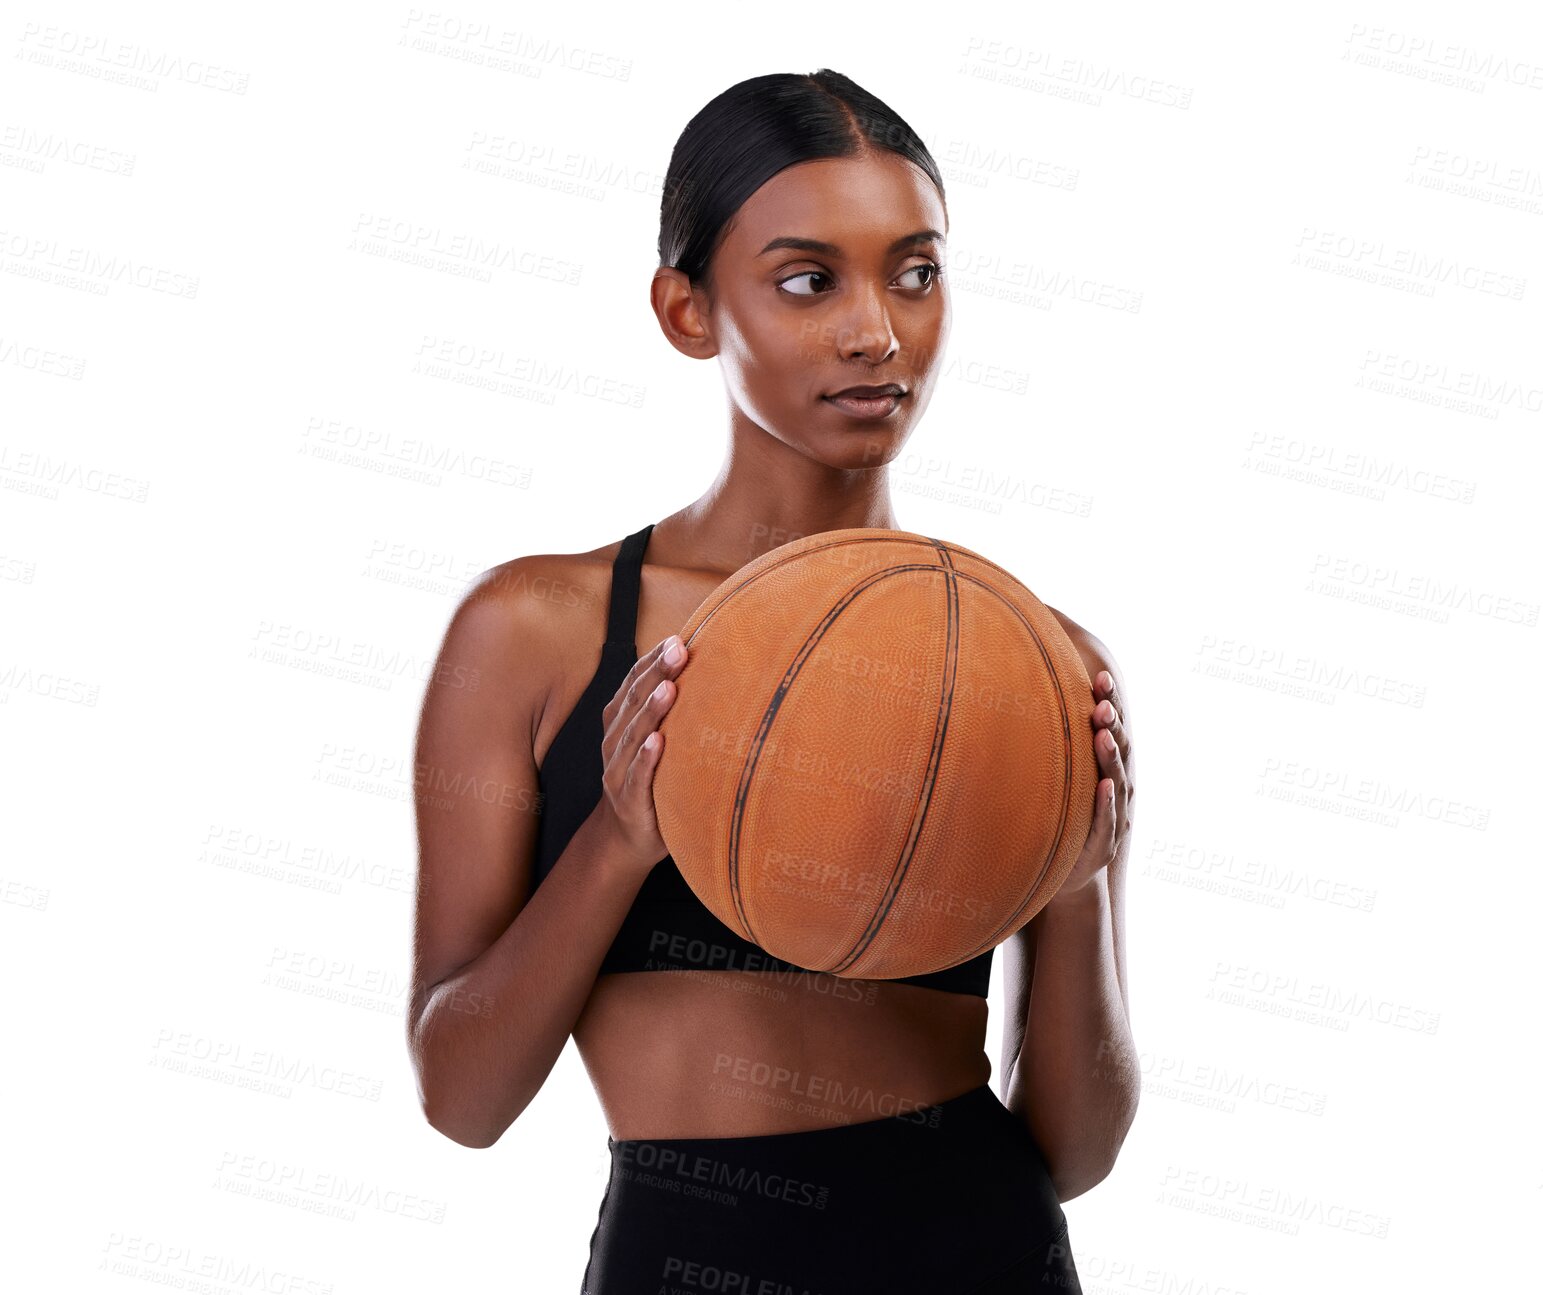 Buy stock photo Fitness, basketball and woman with exercise, ball and training in competition game. Performance, workout or sports, athlete with serious face and confidence isolated on transparent png background.